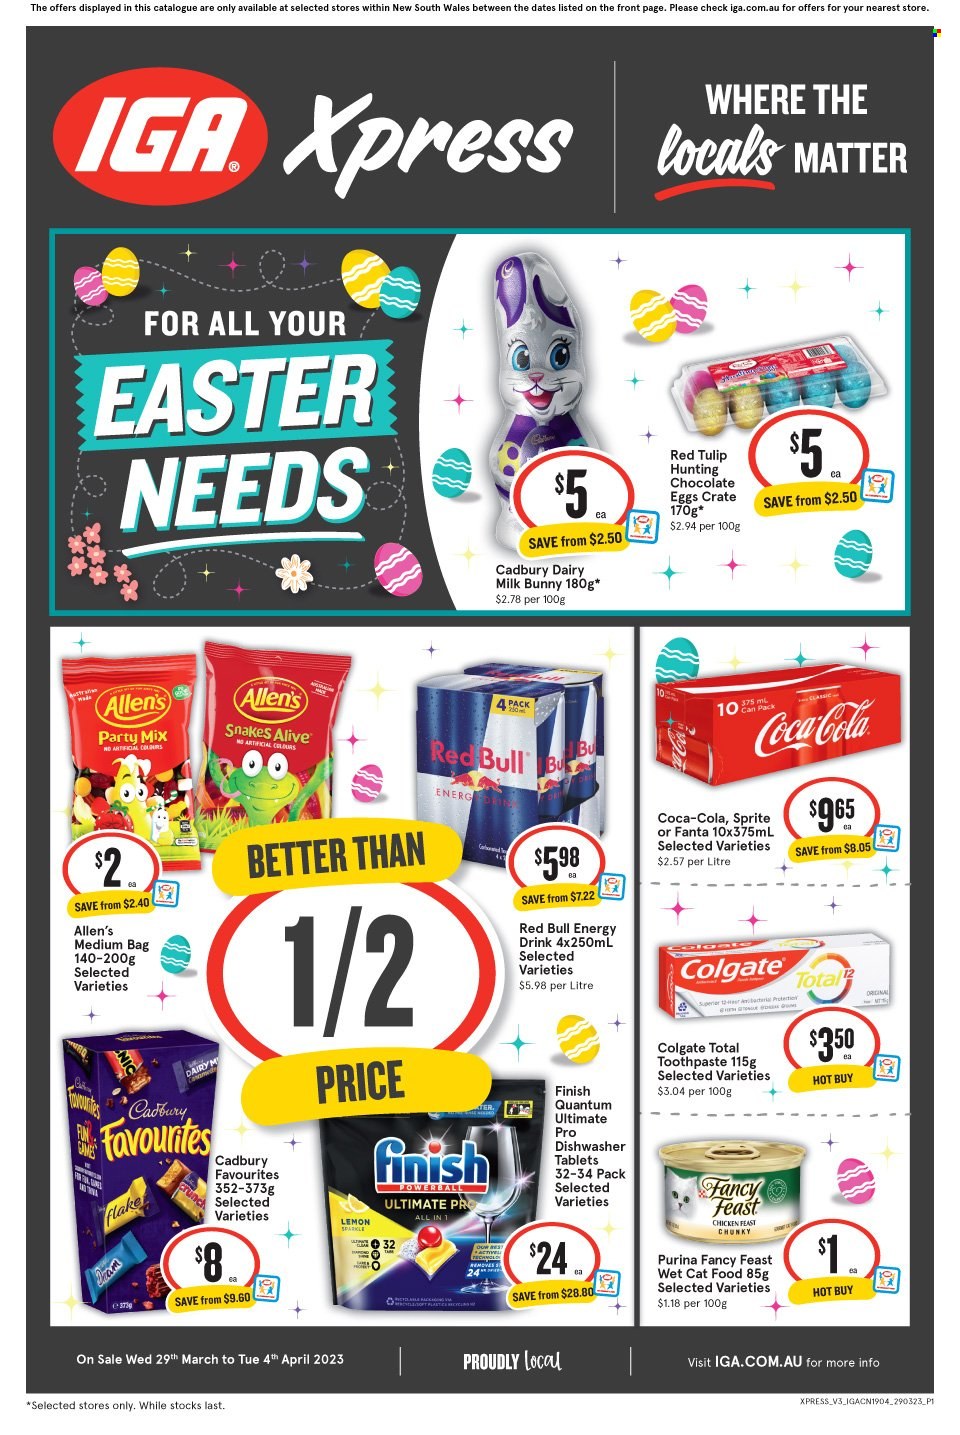 thumbnail - IGA Xpress Catalogue - 29 Mar 2023 - 4 Apr 2023 - Sales products - chocolate, Cadbury, Dairy Milk, chocolate egg, Coca-Cola, Sprite, energy drink, Fanta, Red Bull, dishwasher cleaner, Finish Powerball, Finish Quantum Ultimate, dishwasher tablets, Colgate, toothpaste, crate, animal food, cat food, Purina, Fancy Feast, wet cat food. Page 1.